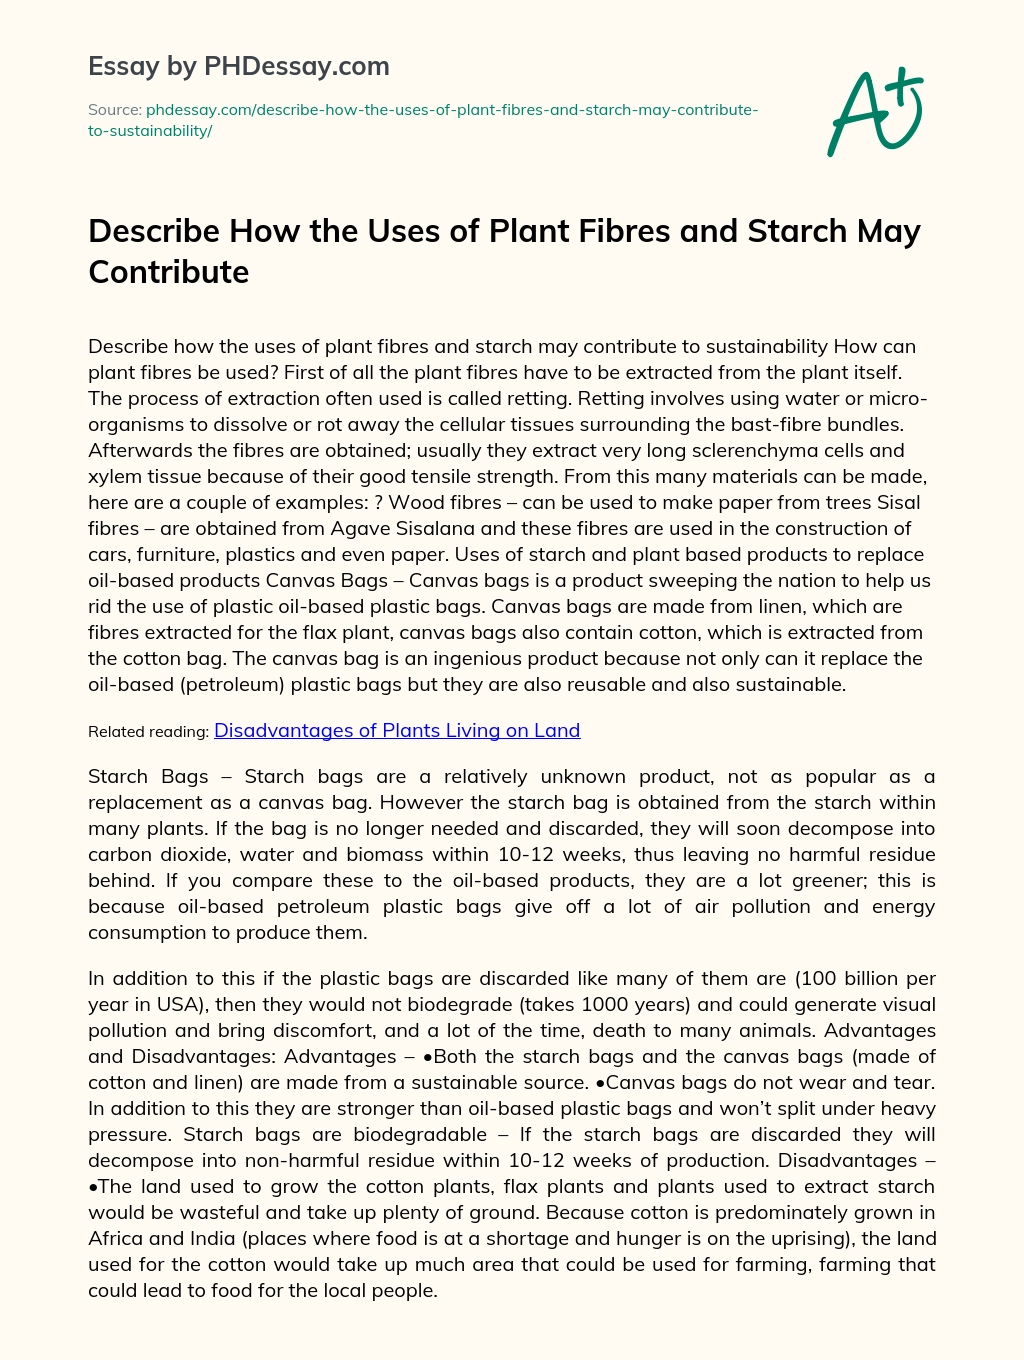 Describe How the Uses of Plant Fibres and Starch May Contribute essay